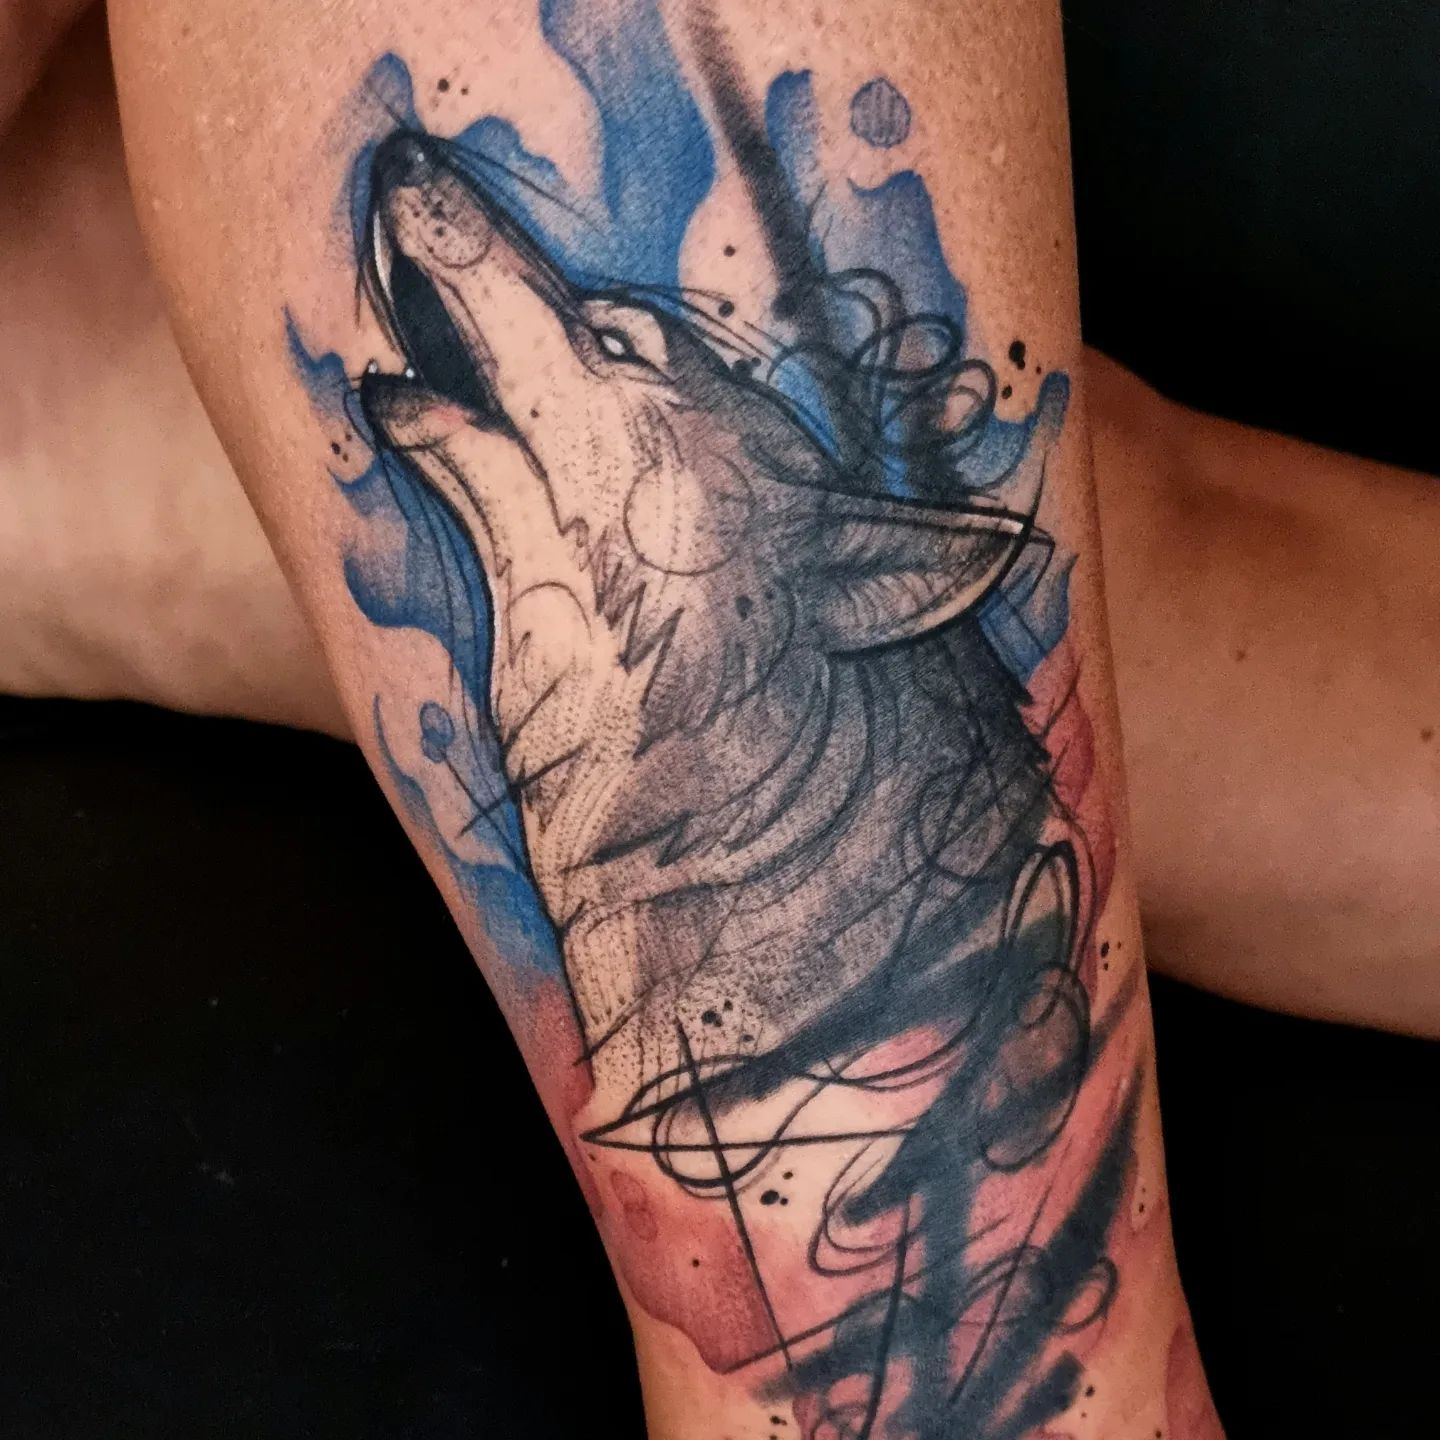 Generally, wildness is the first thing that comes to mind when thinking about a wolf tattoo. But this elegant wolf with blue vibes will break taboos.